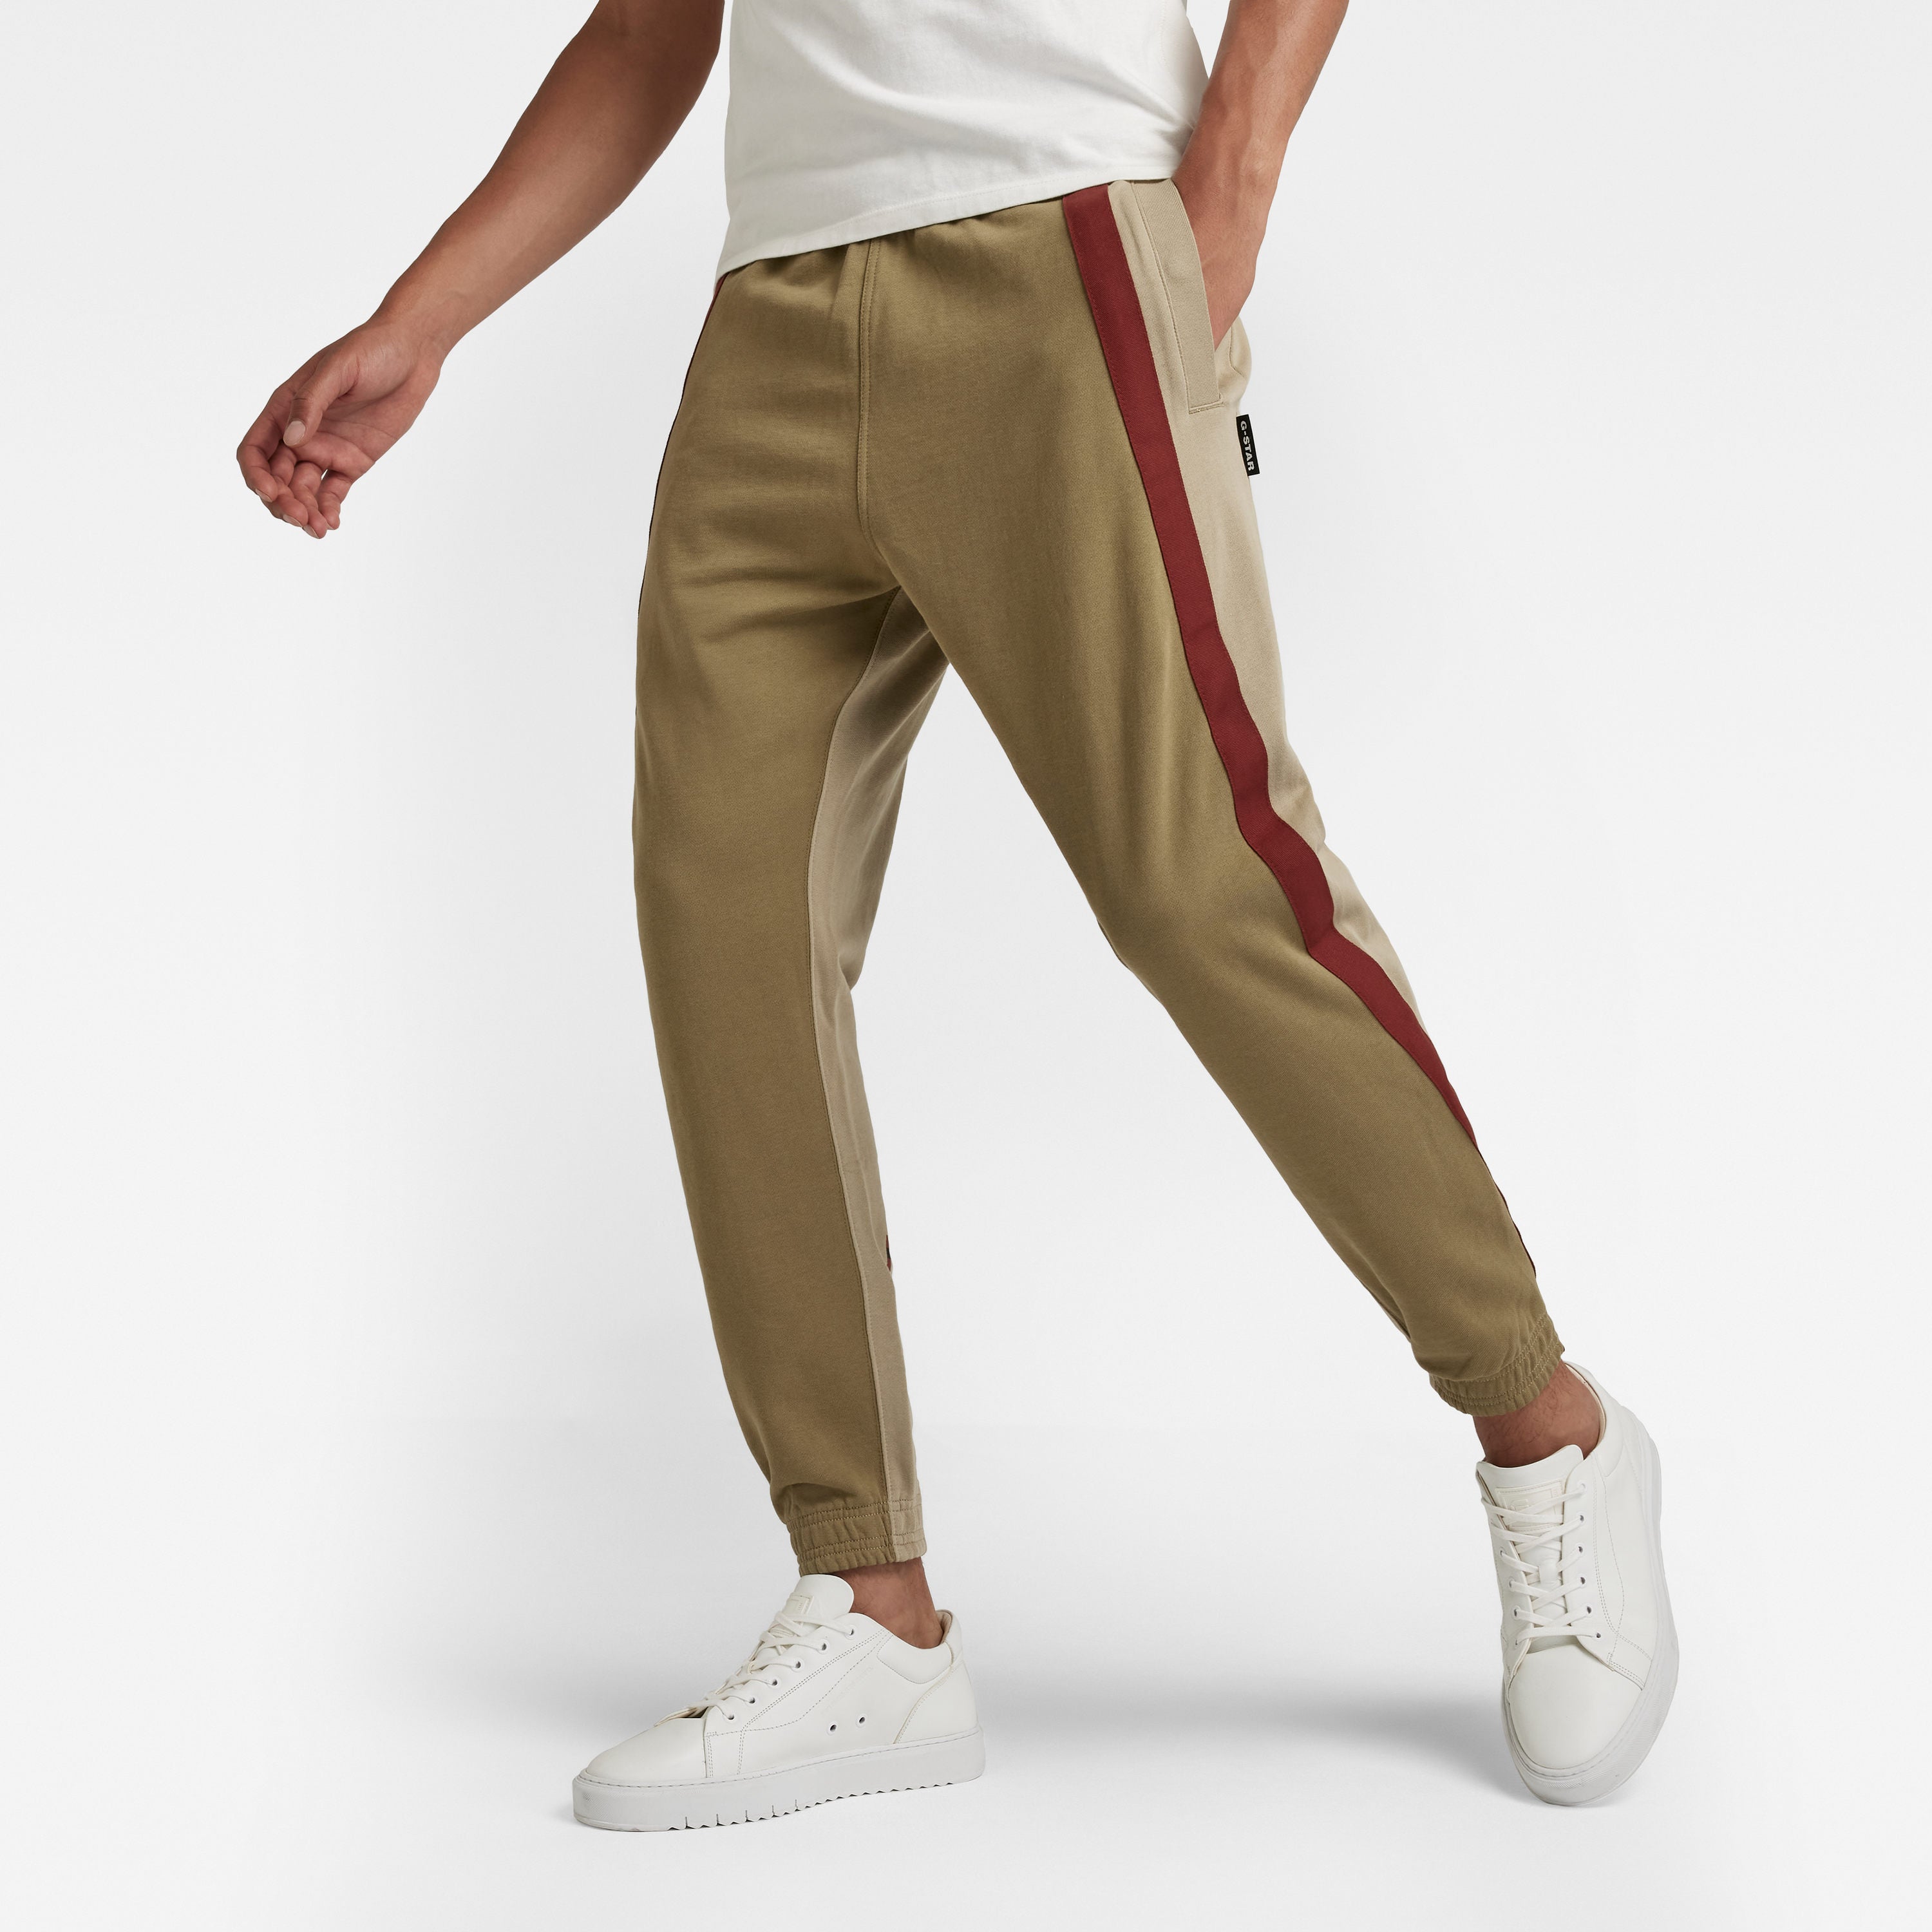 G Star Sweatpants - Tape Color Block - Army Green